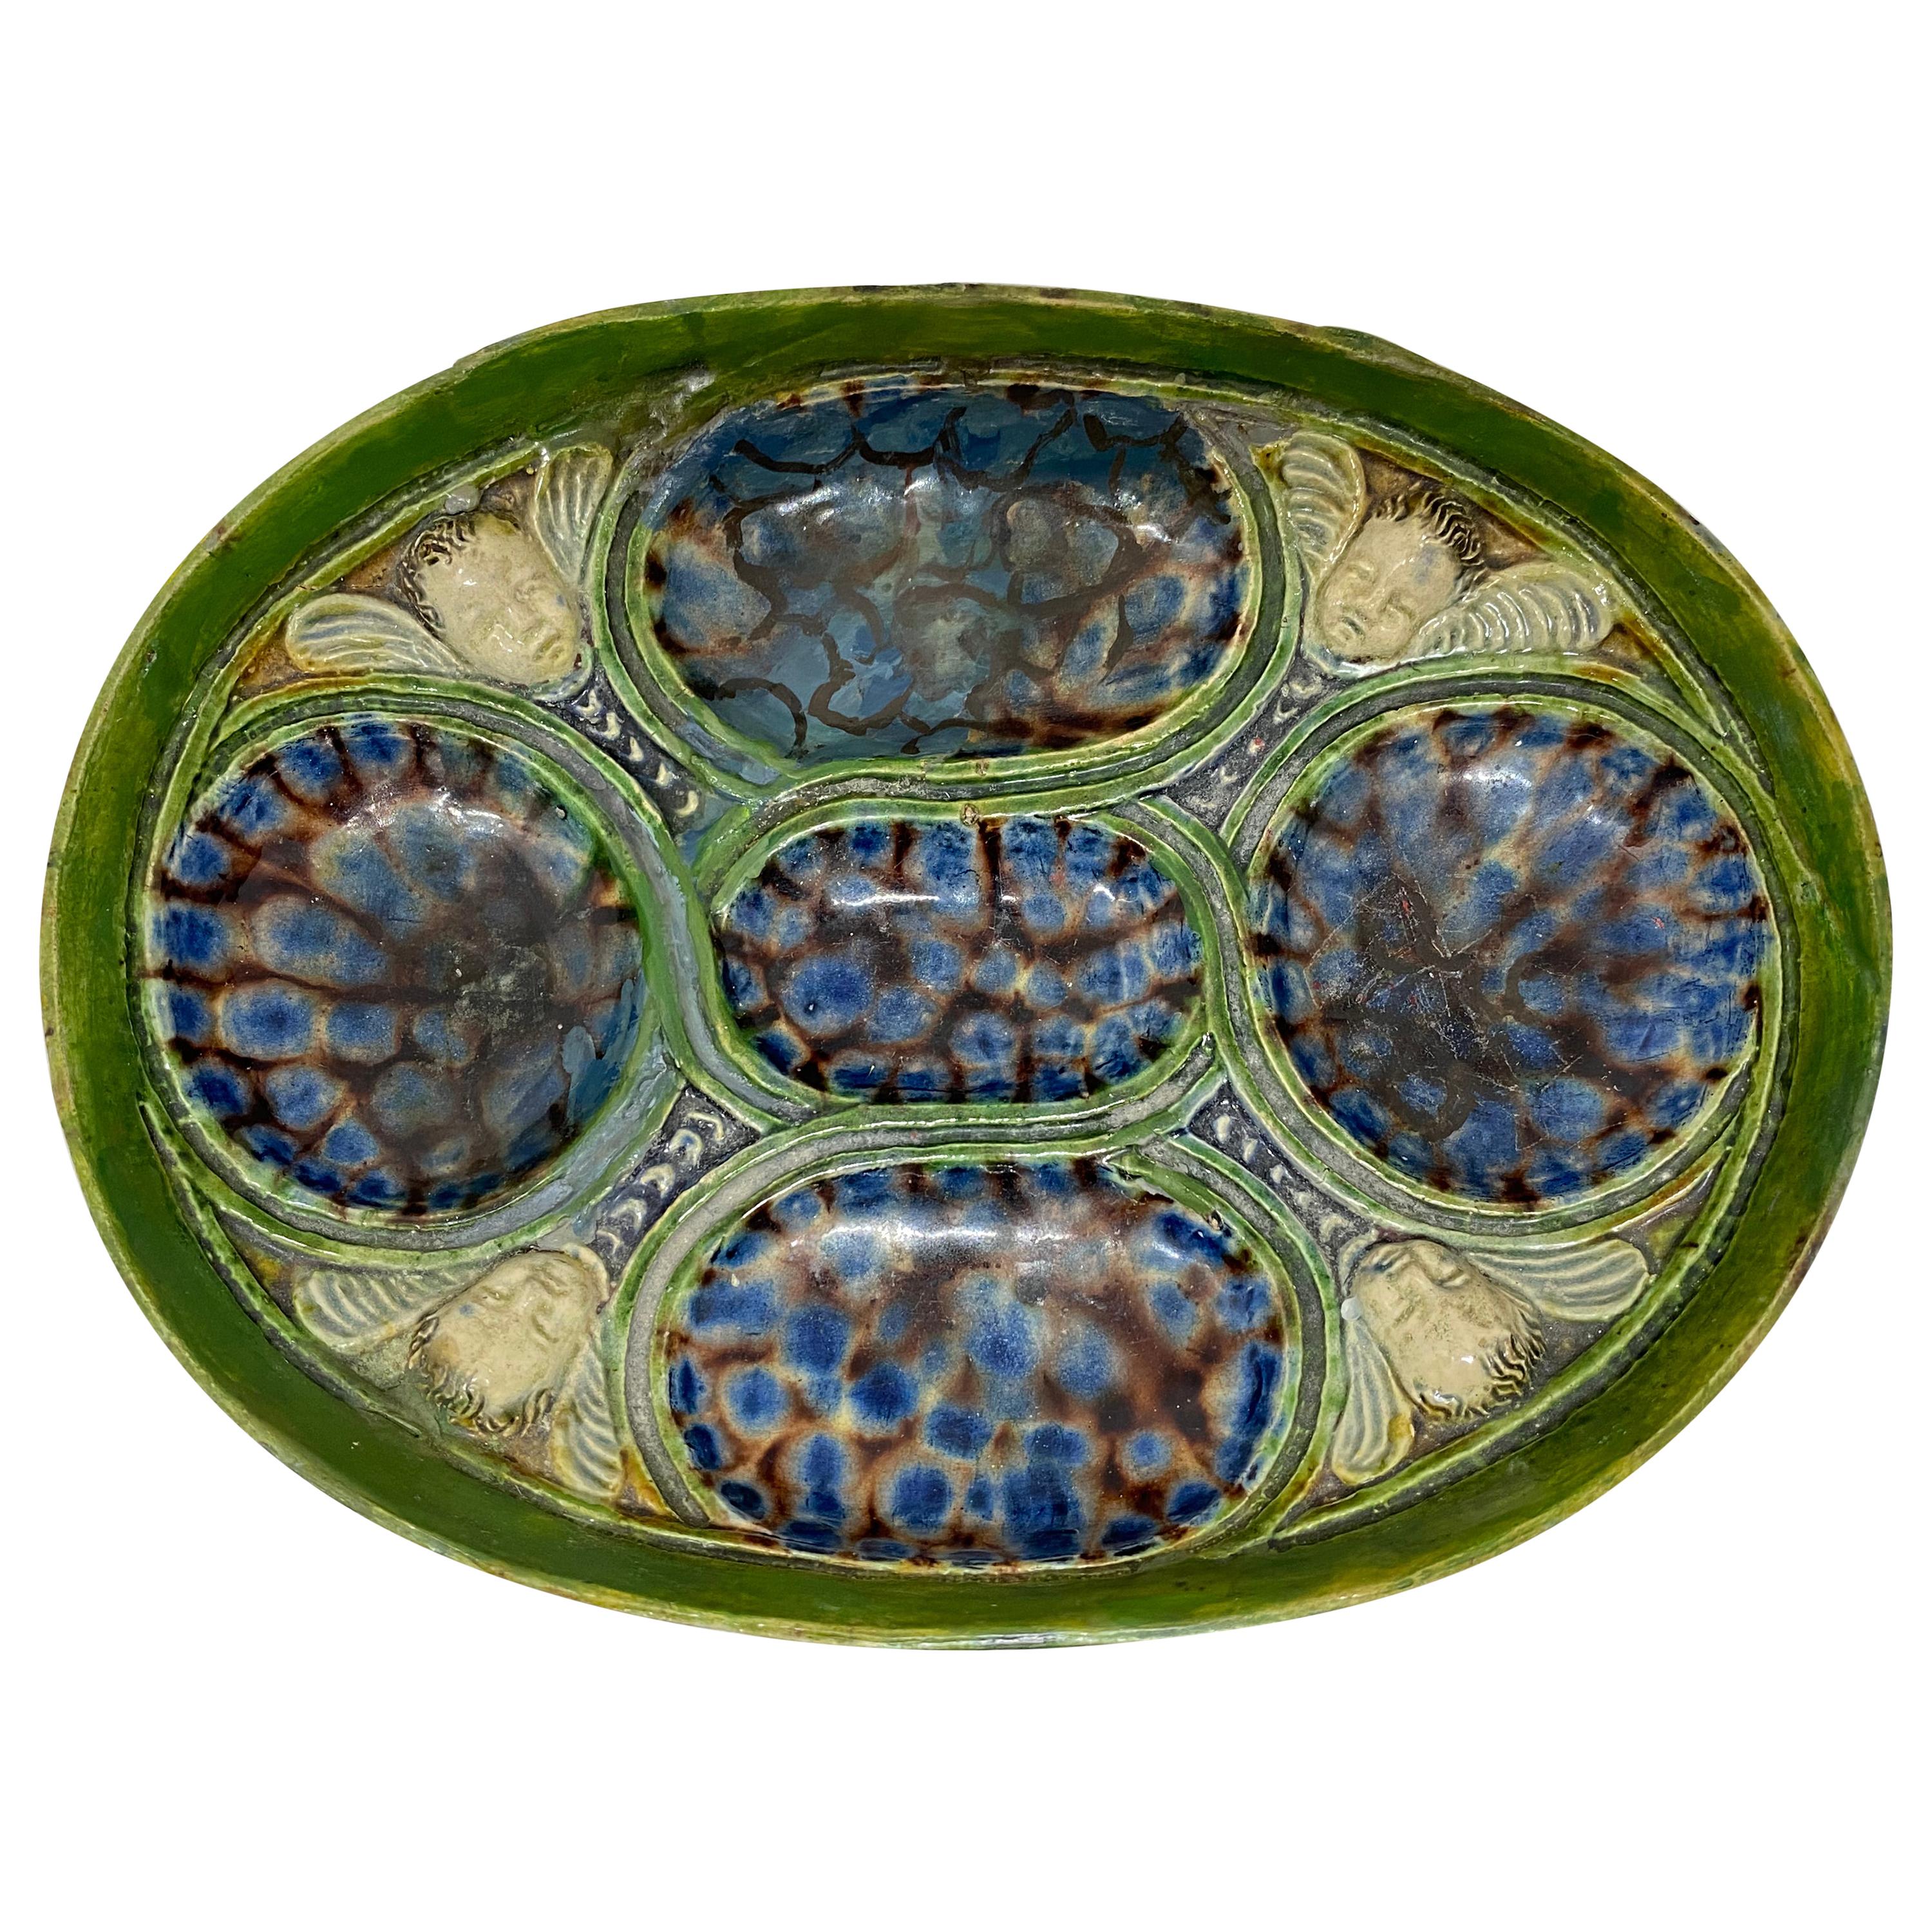 Oval Dish with Winged Putti, After Bernard Palissy, French, 17th Century